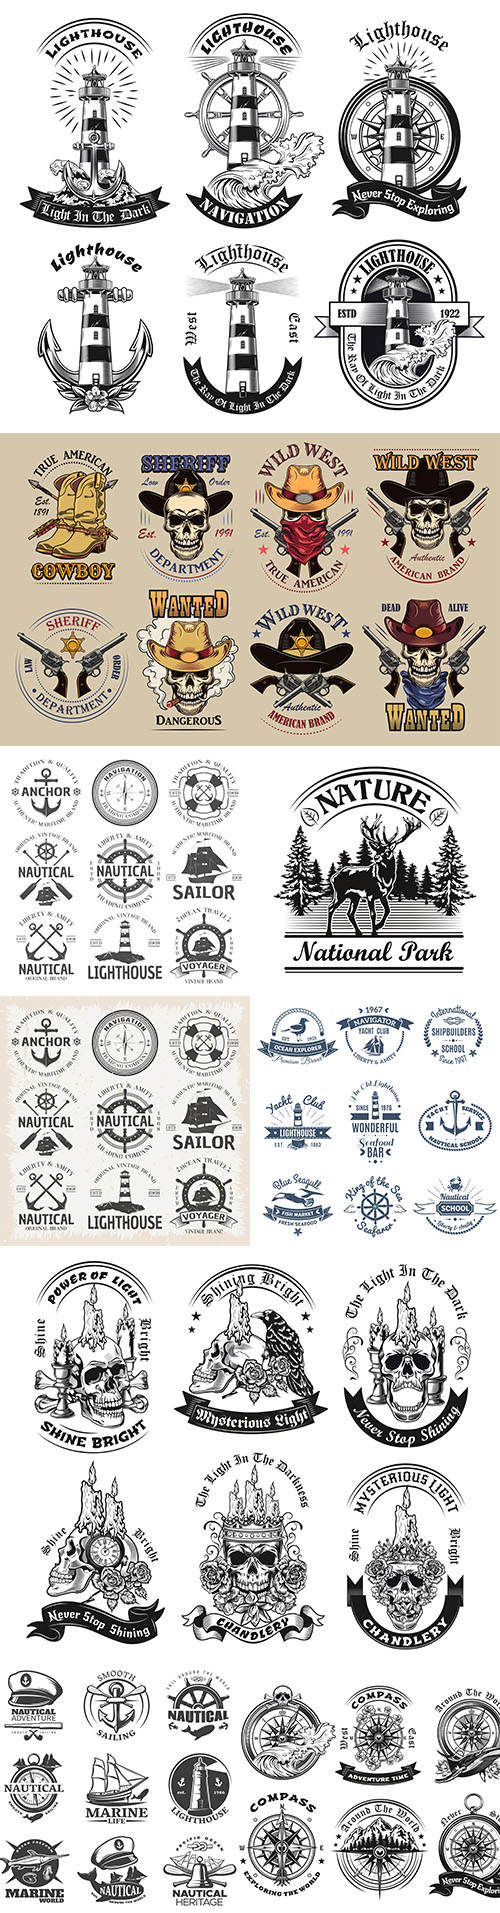 Marine world and Wild West set of labels and logos
